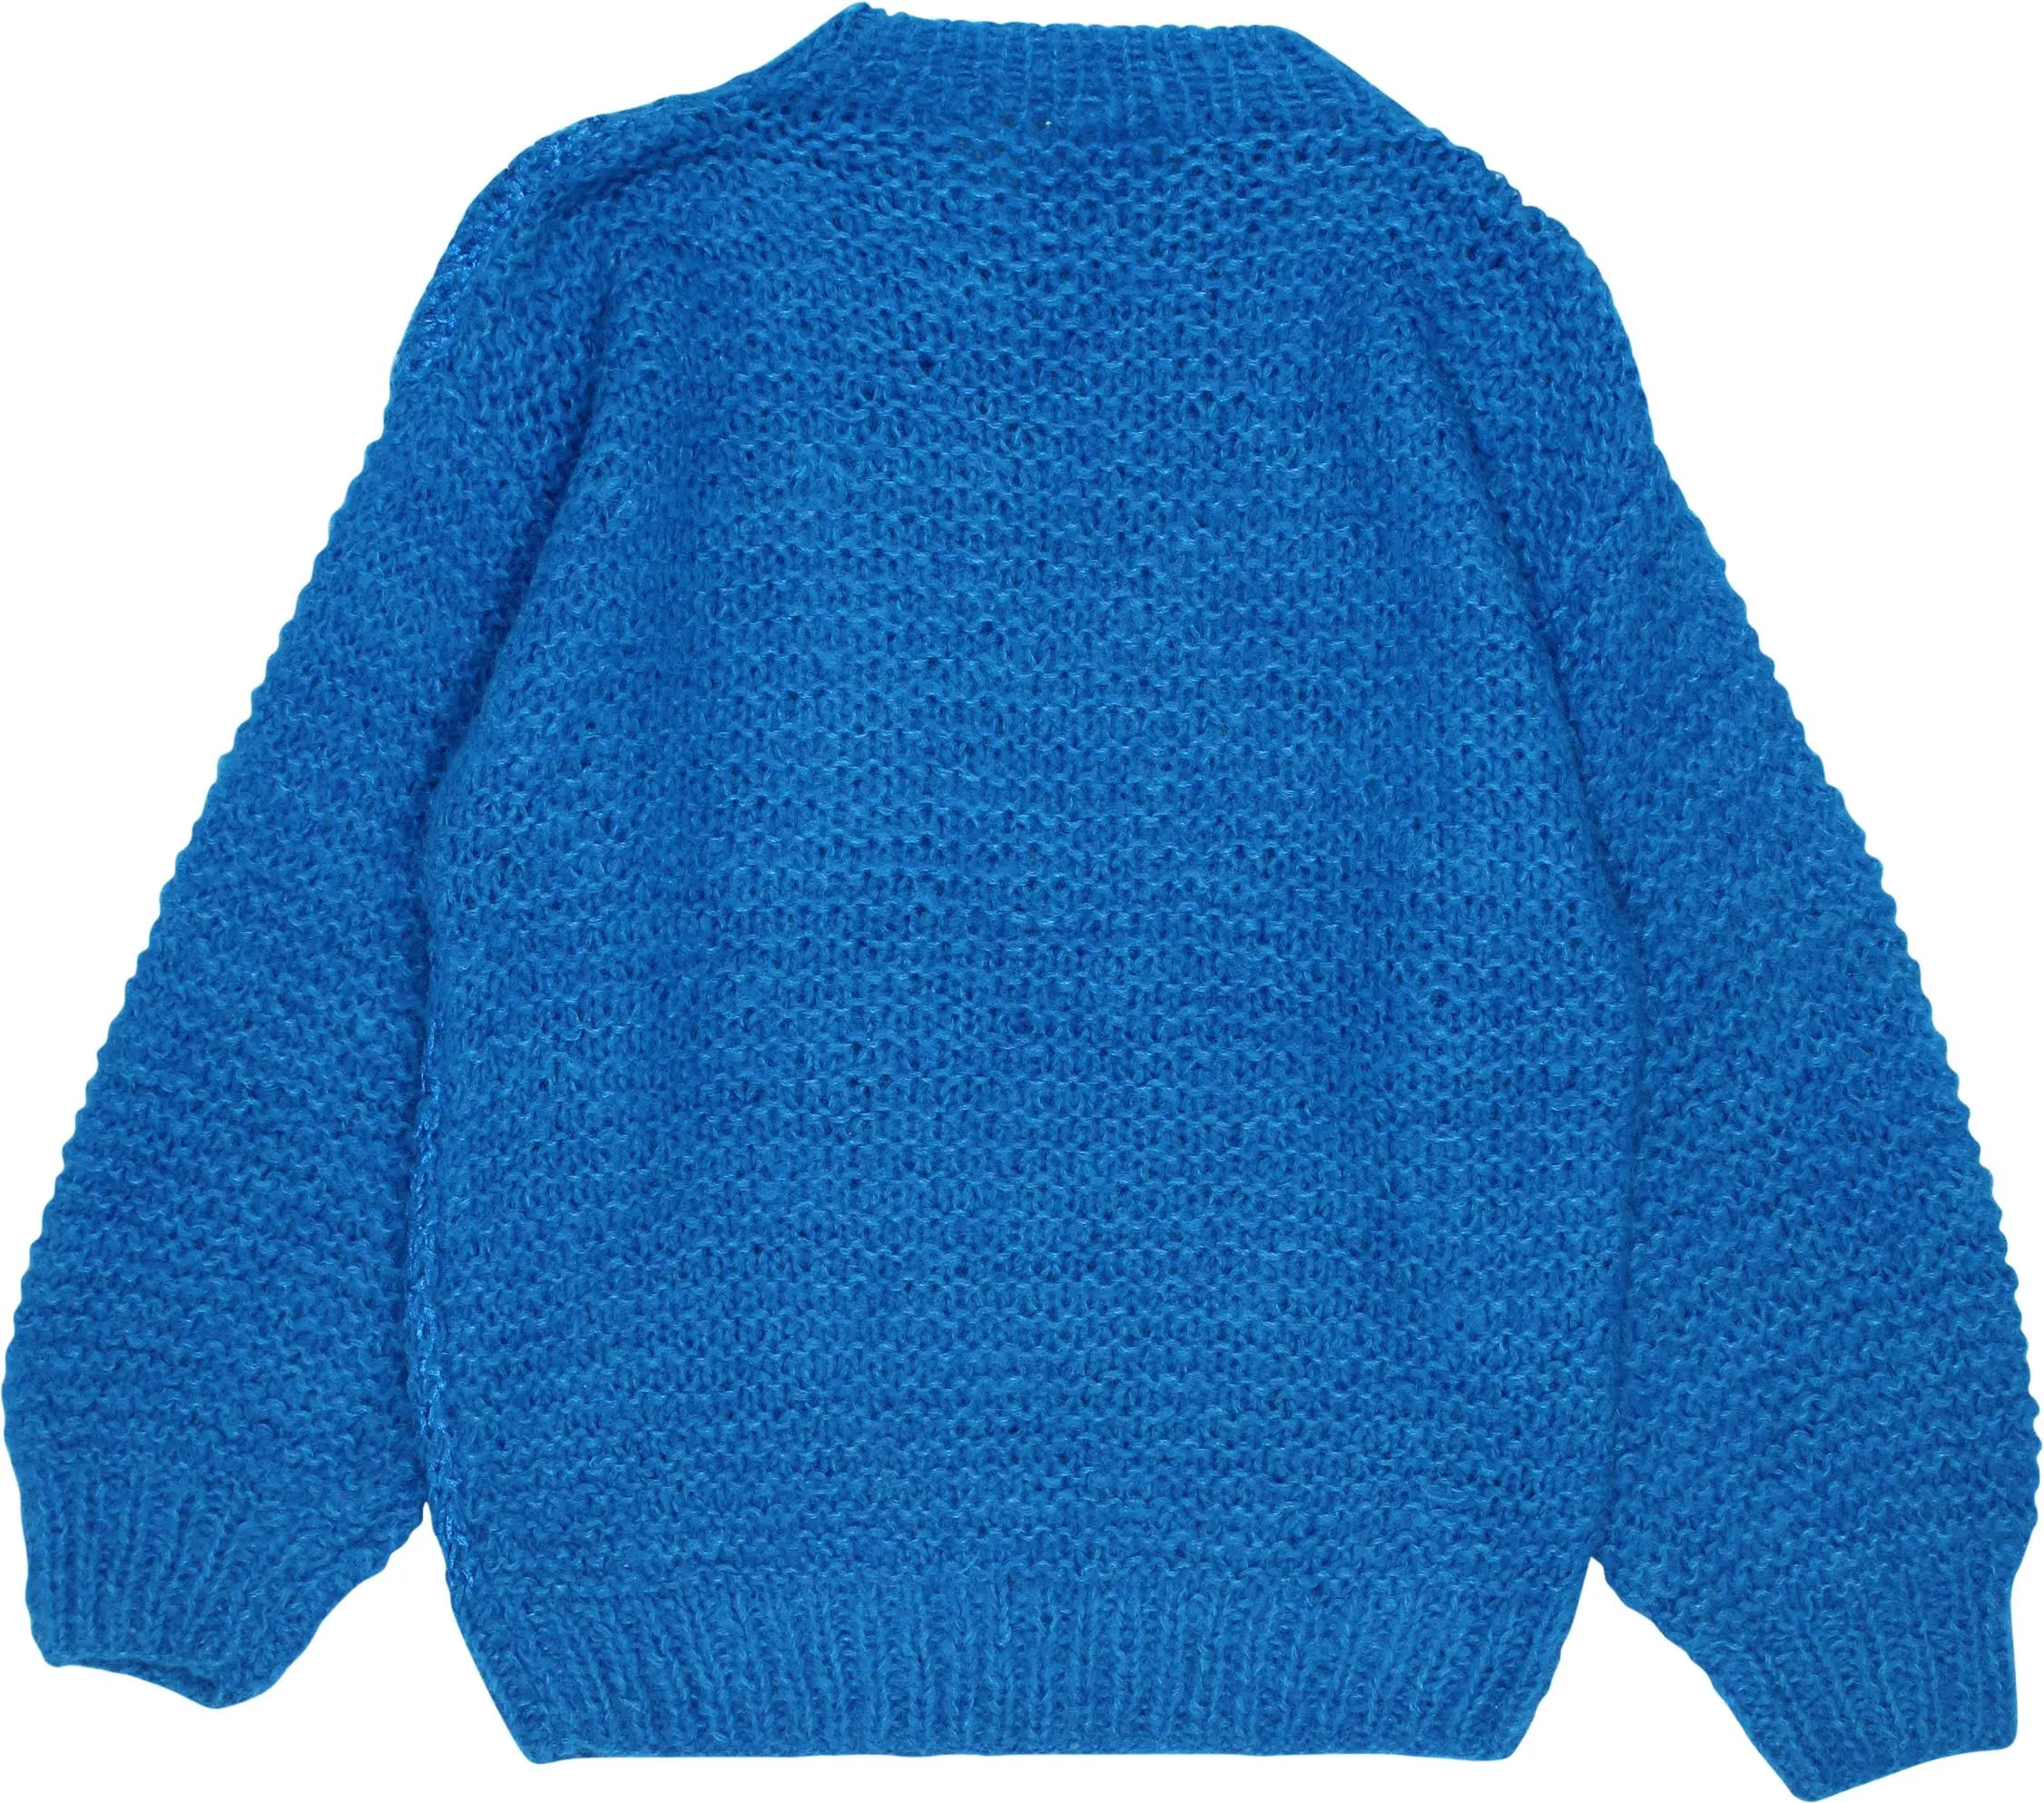 Unknown - Wool Blend Knitted Jumper- ThriftTale.com - Vintage and second handclothing